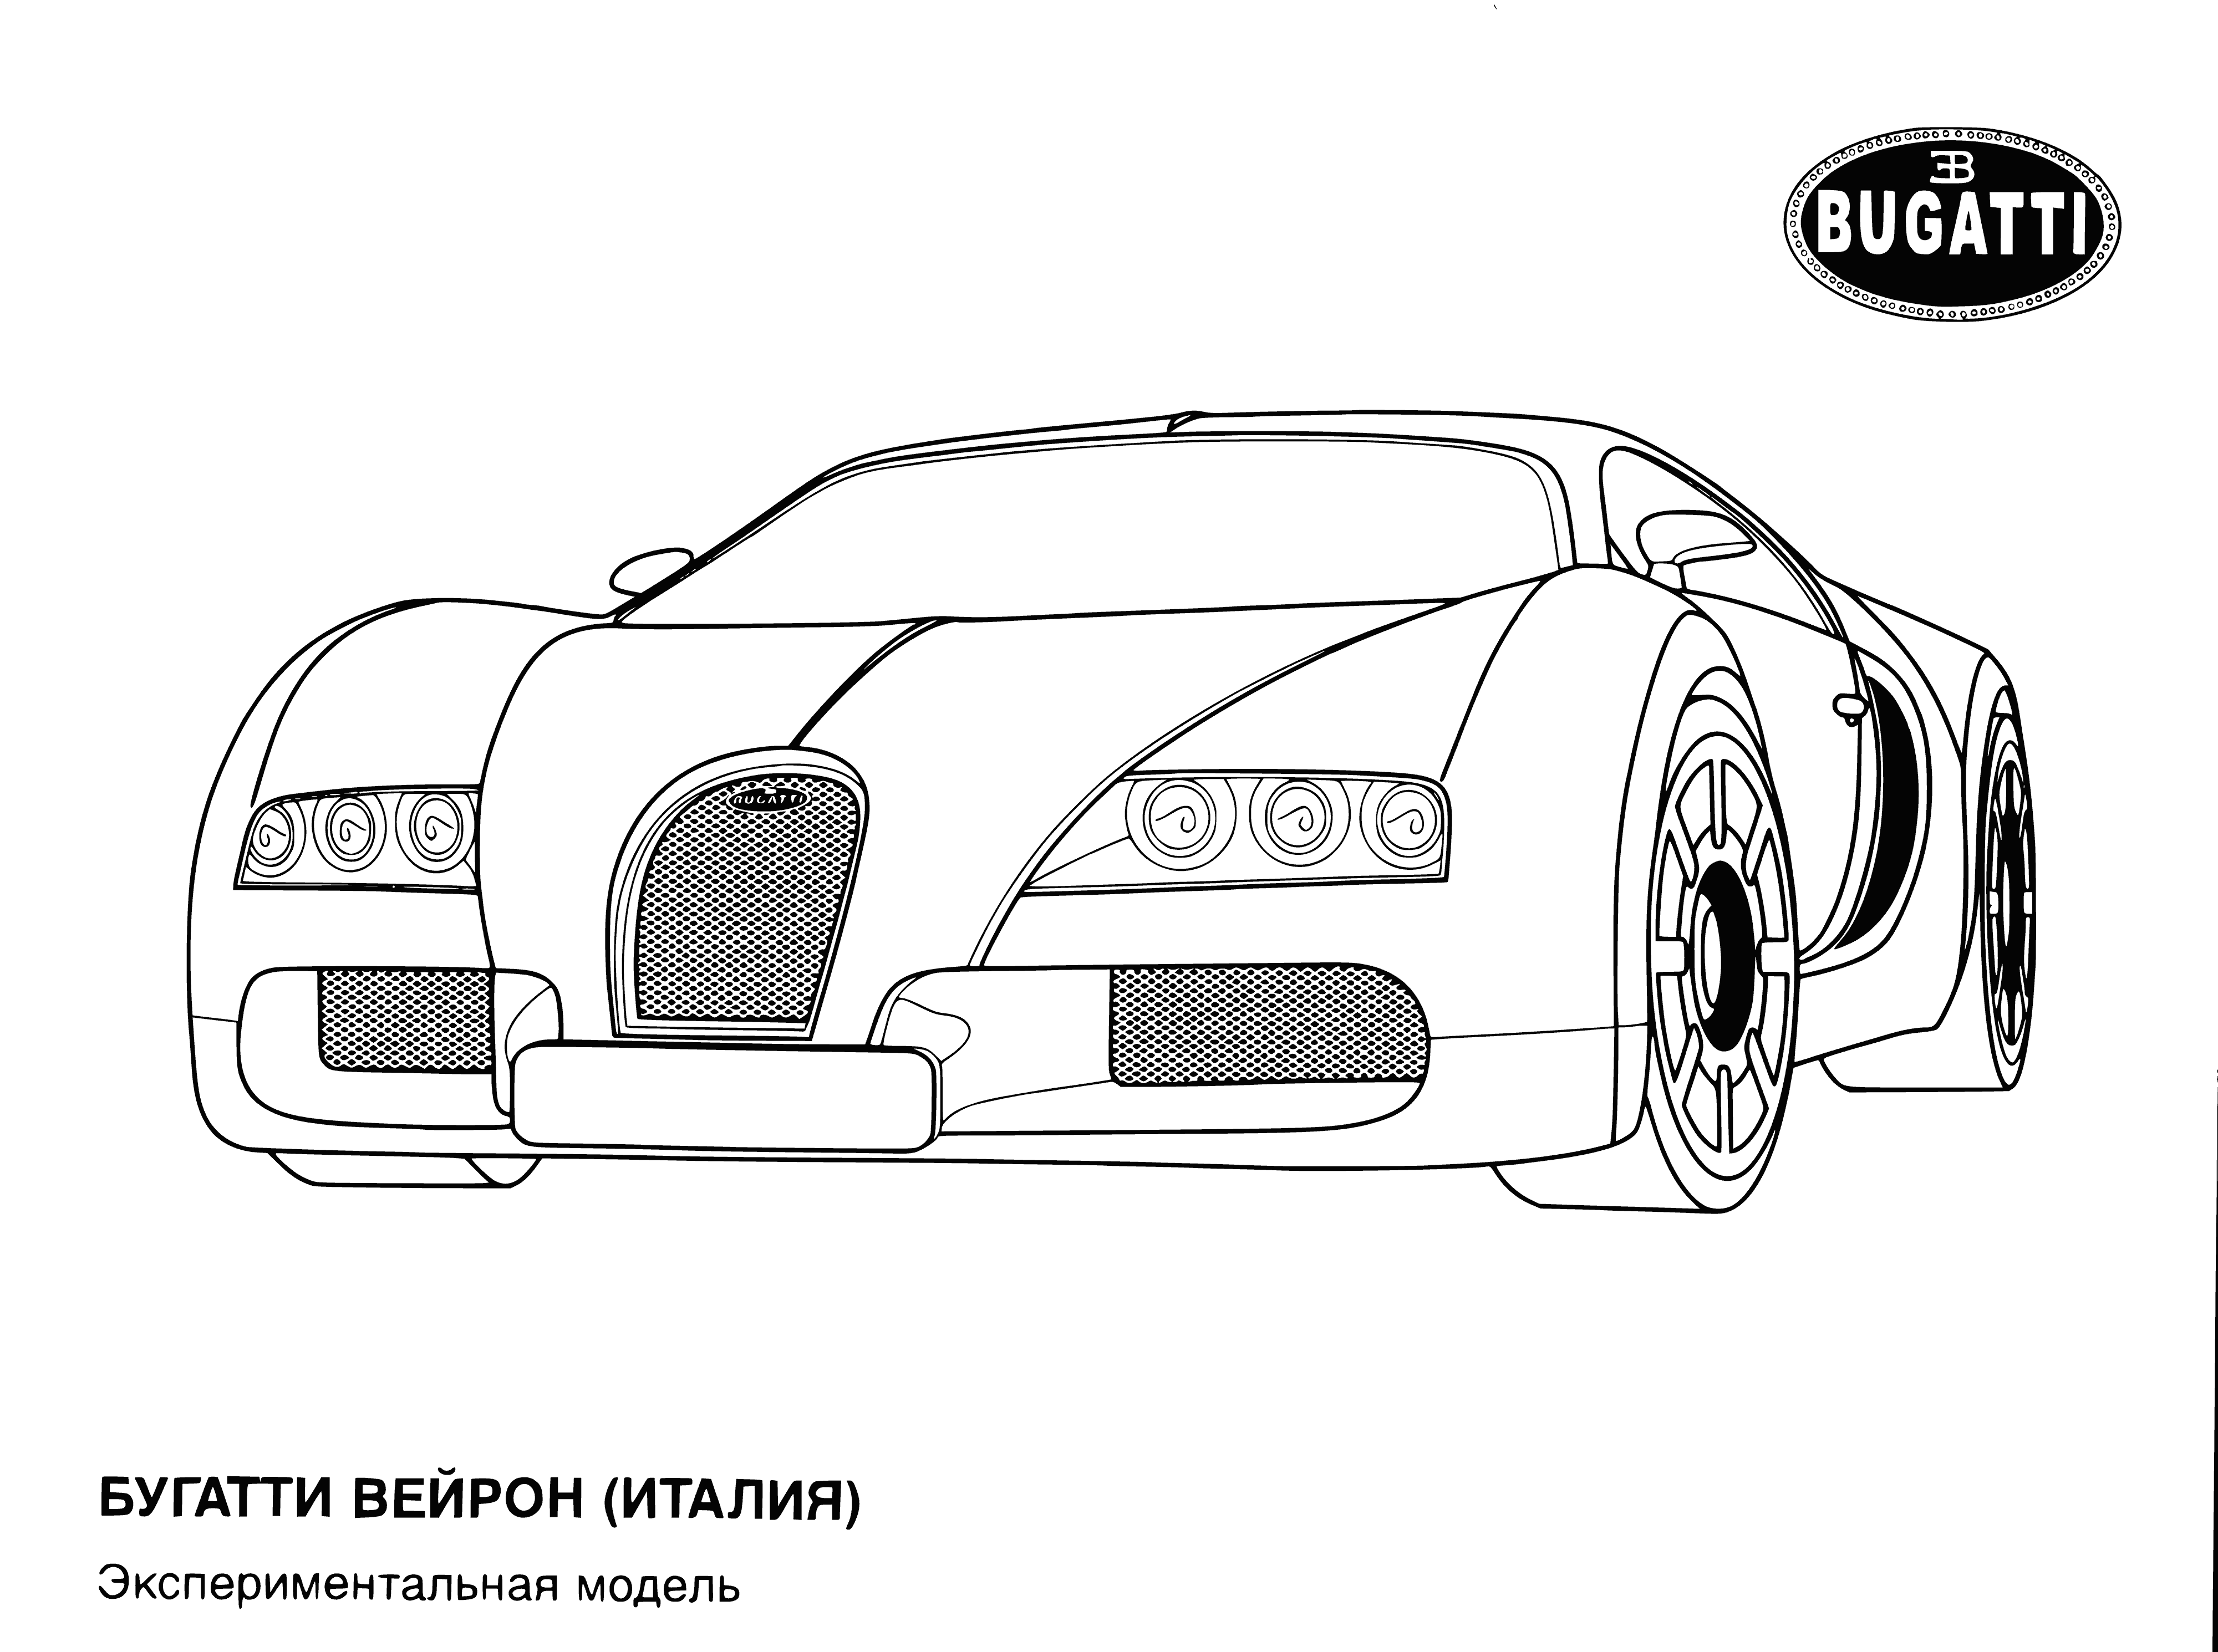 coloring page: Bugatti unveils two eye-catching red sports cars w/long, sleek lines, low to the ground & prominent logo. Turn heads even in a crowded lot.